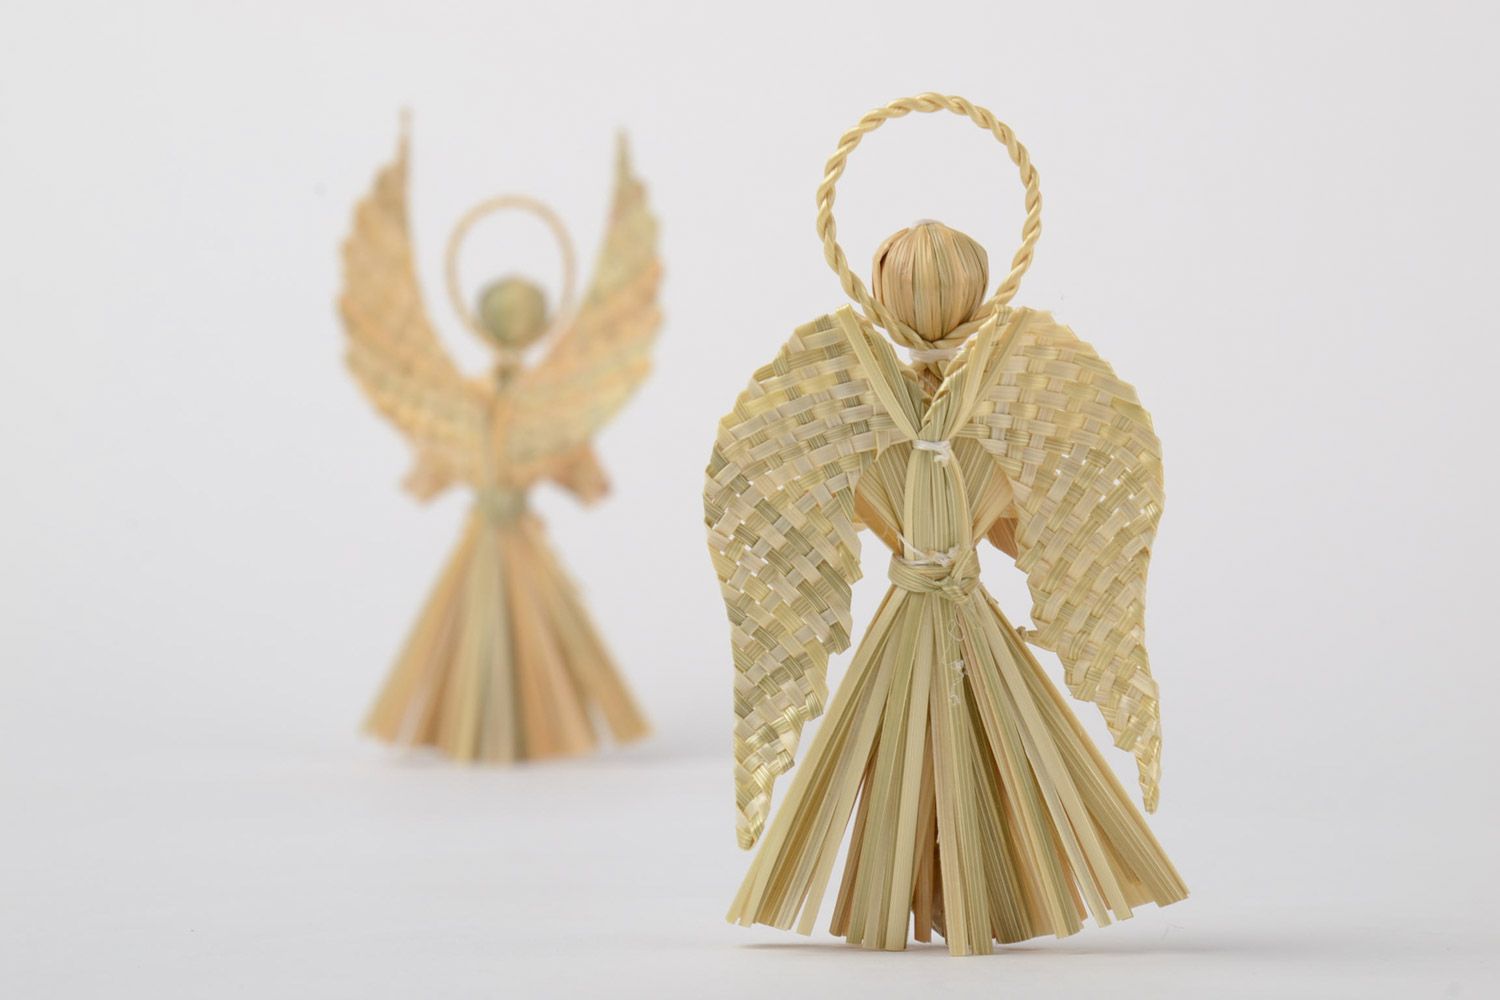 Set of 2 handmade decorative wall hanging figurines of angels woven of straw photo 4